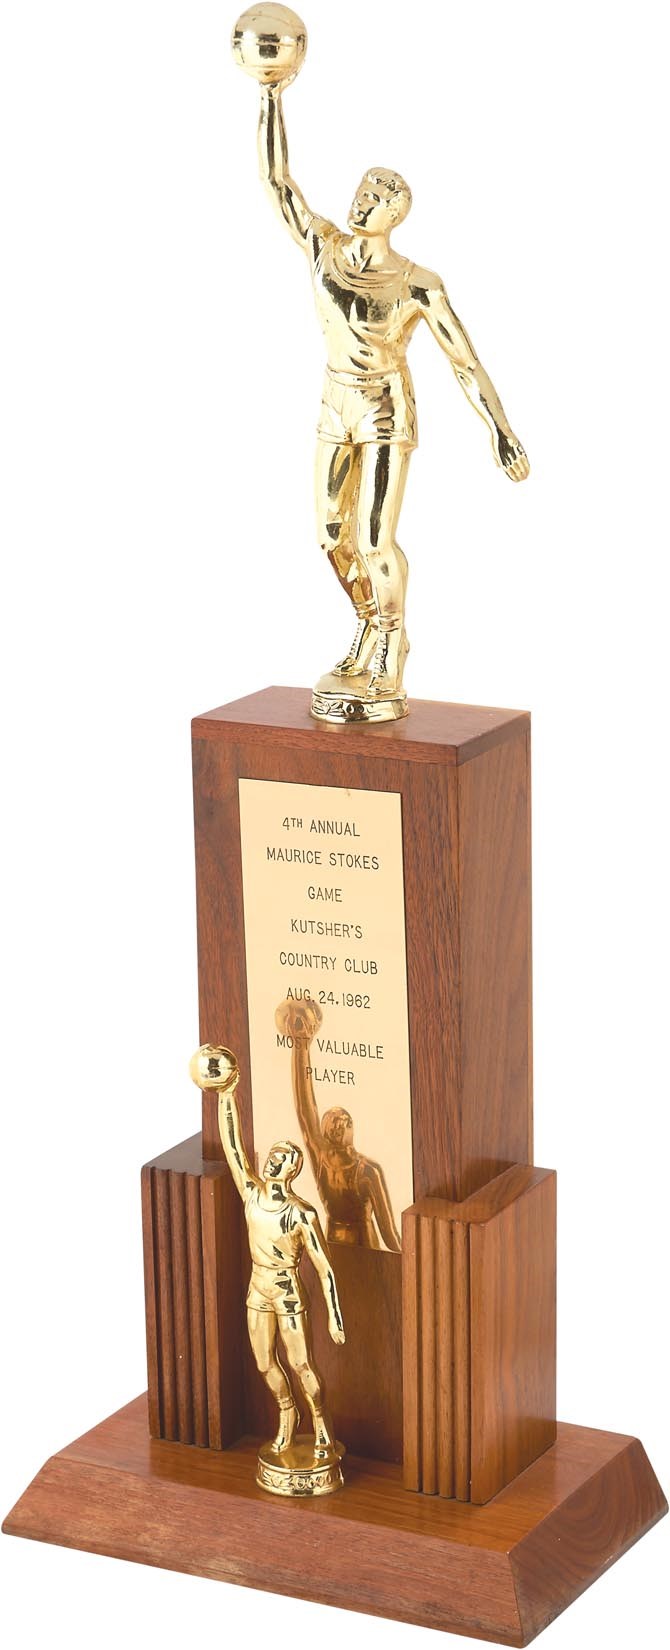 - 1962 Maurice Stokes Benefit Game MVP Trophy Presented to Oscar Robertson